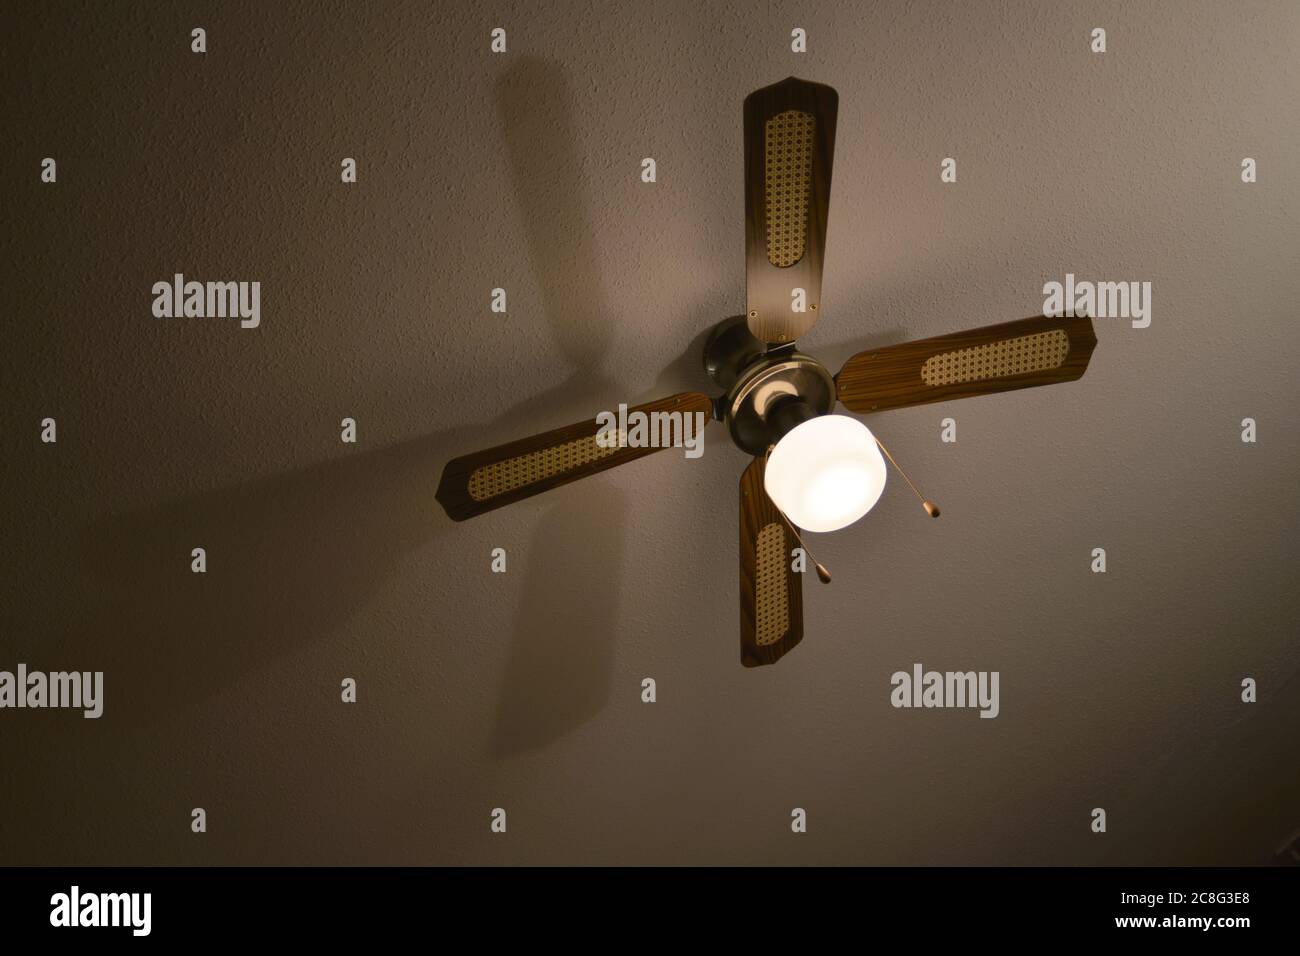 Mediterranean brown wood and material ceiling fan casts a long shadow on a plaster ceiling. Stock Photo